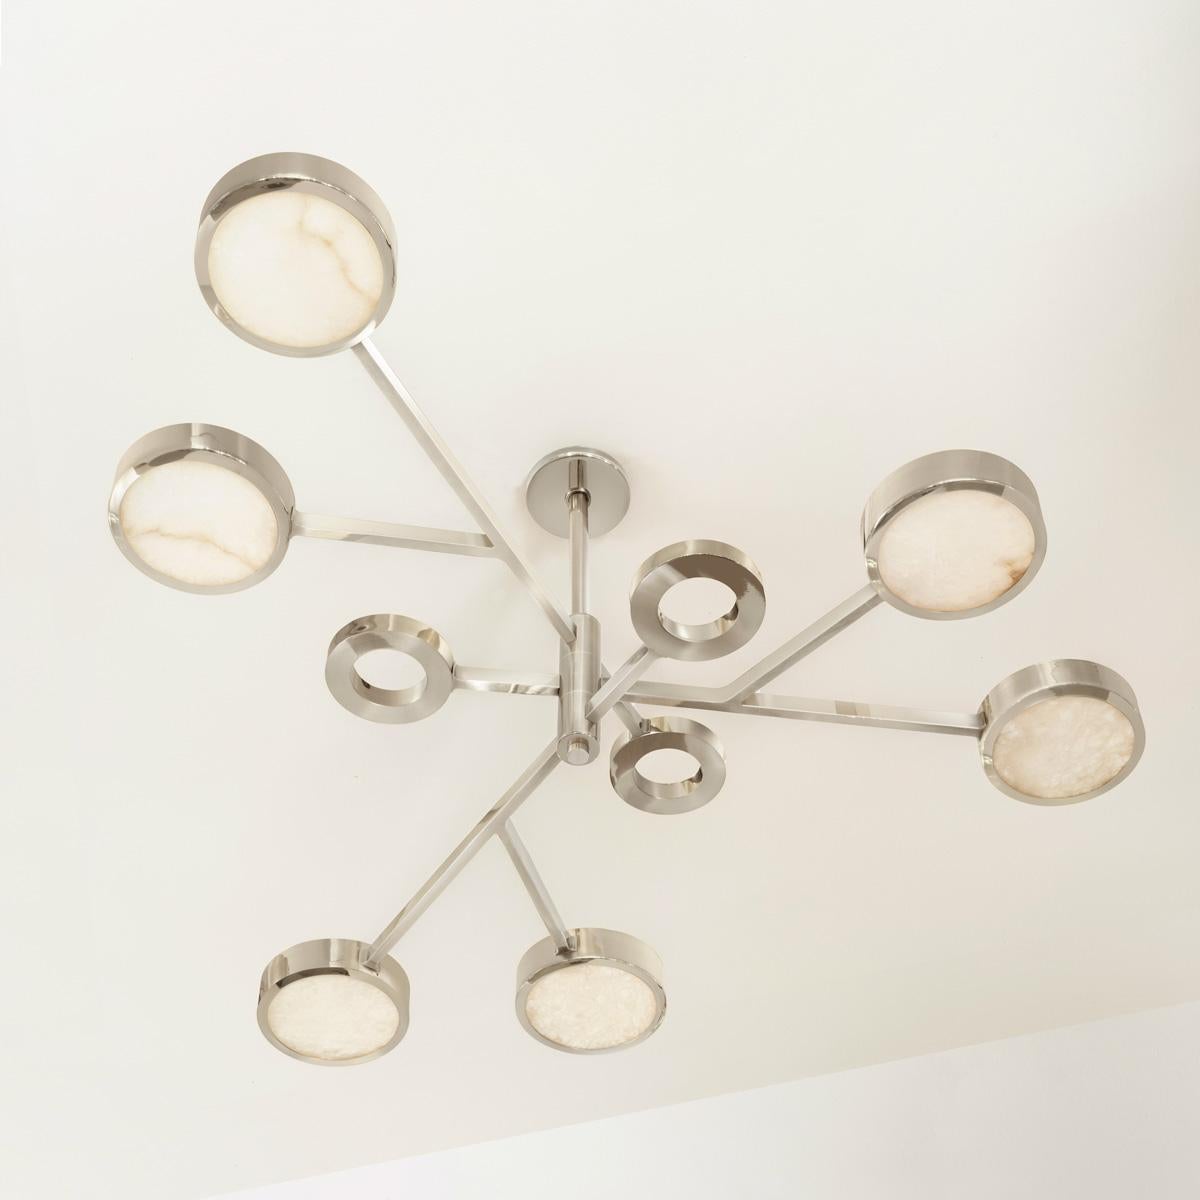 Volterra Ceiling Light by Gaspare Asaro-Satin Nickel and Satin Brass Finish In New Condition For Sale In New York, NY